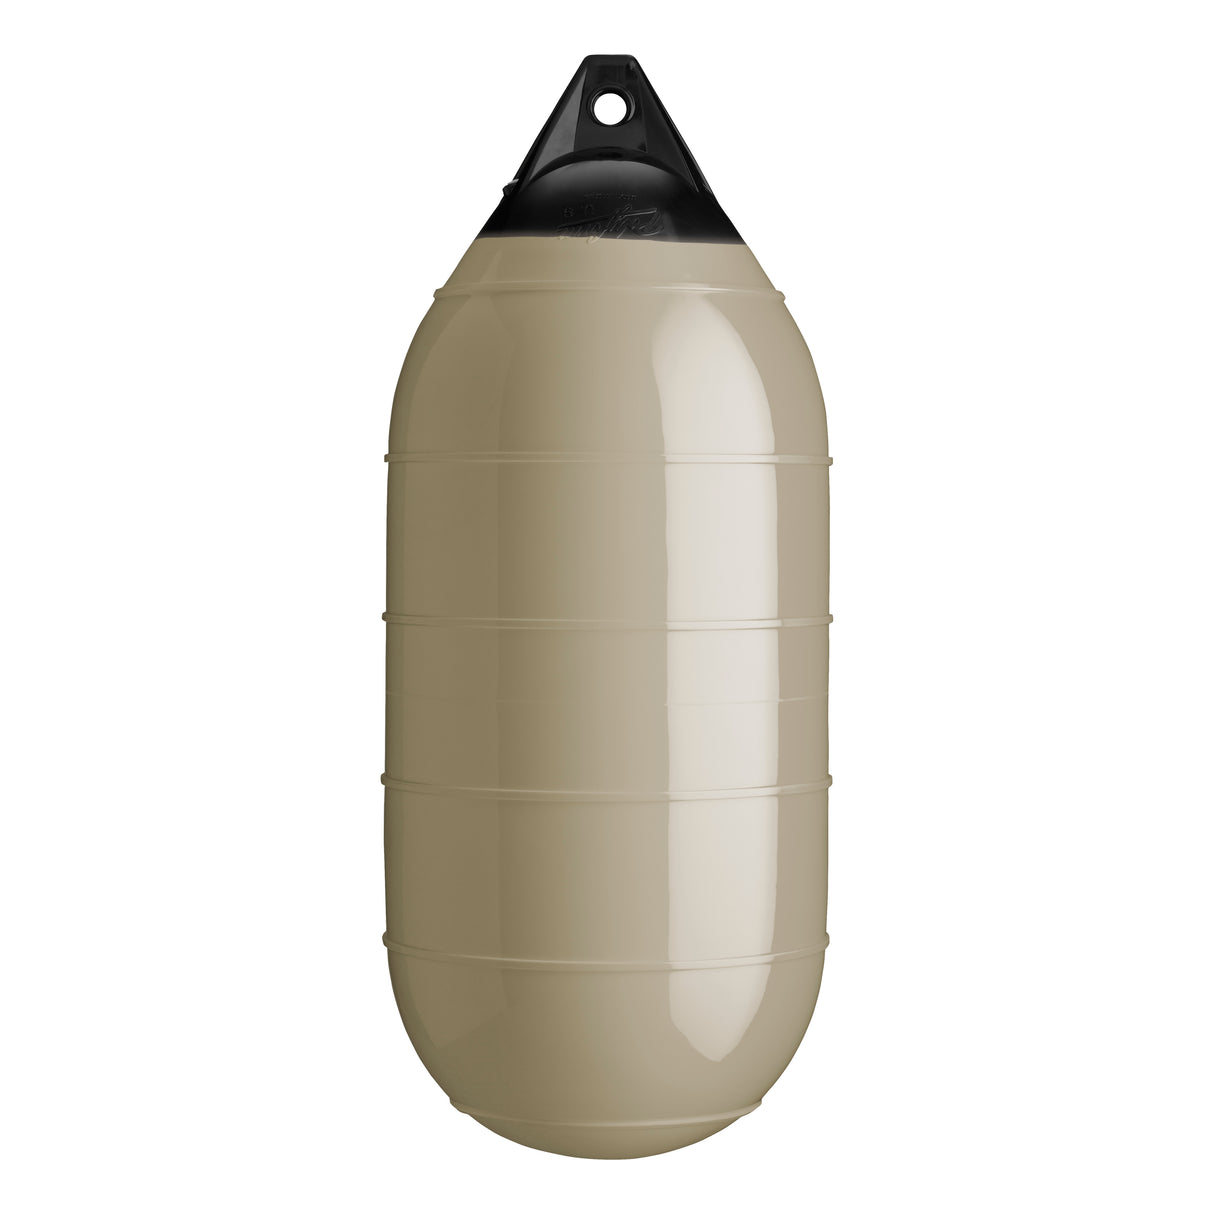 Sand low drag buoy with Black-Top, Polyform LD-4 